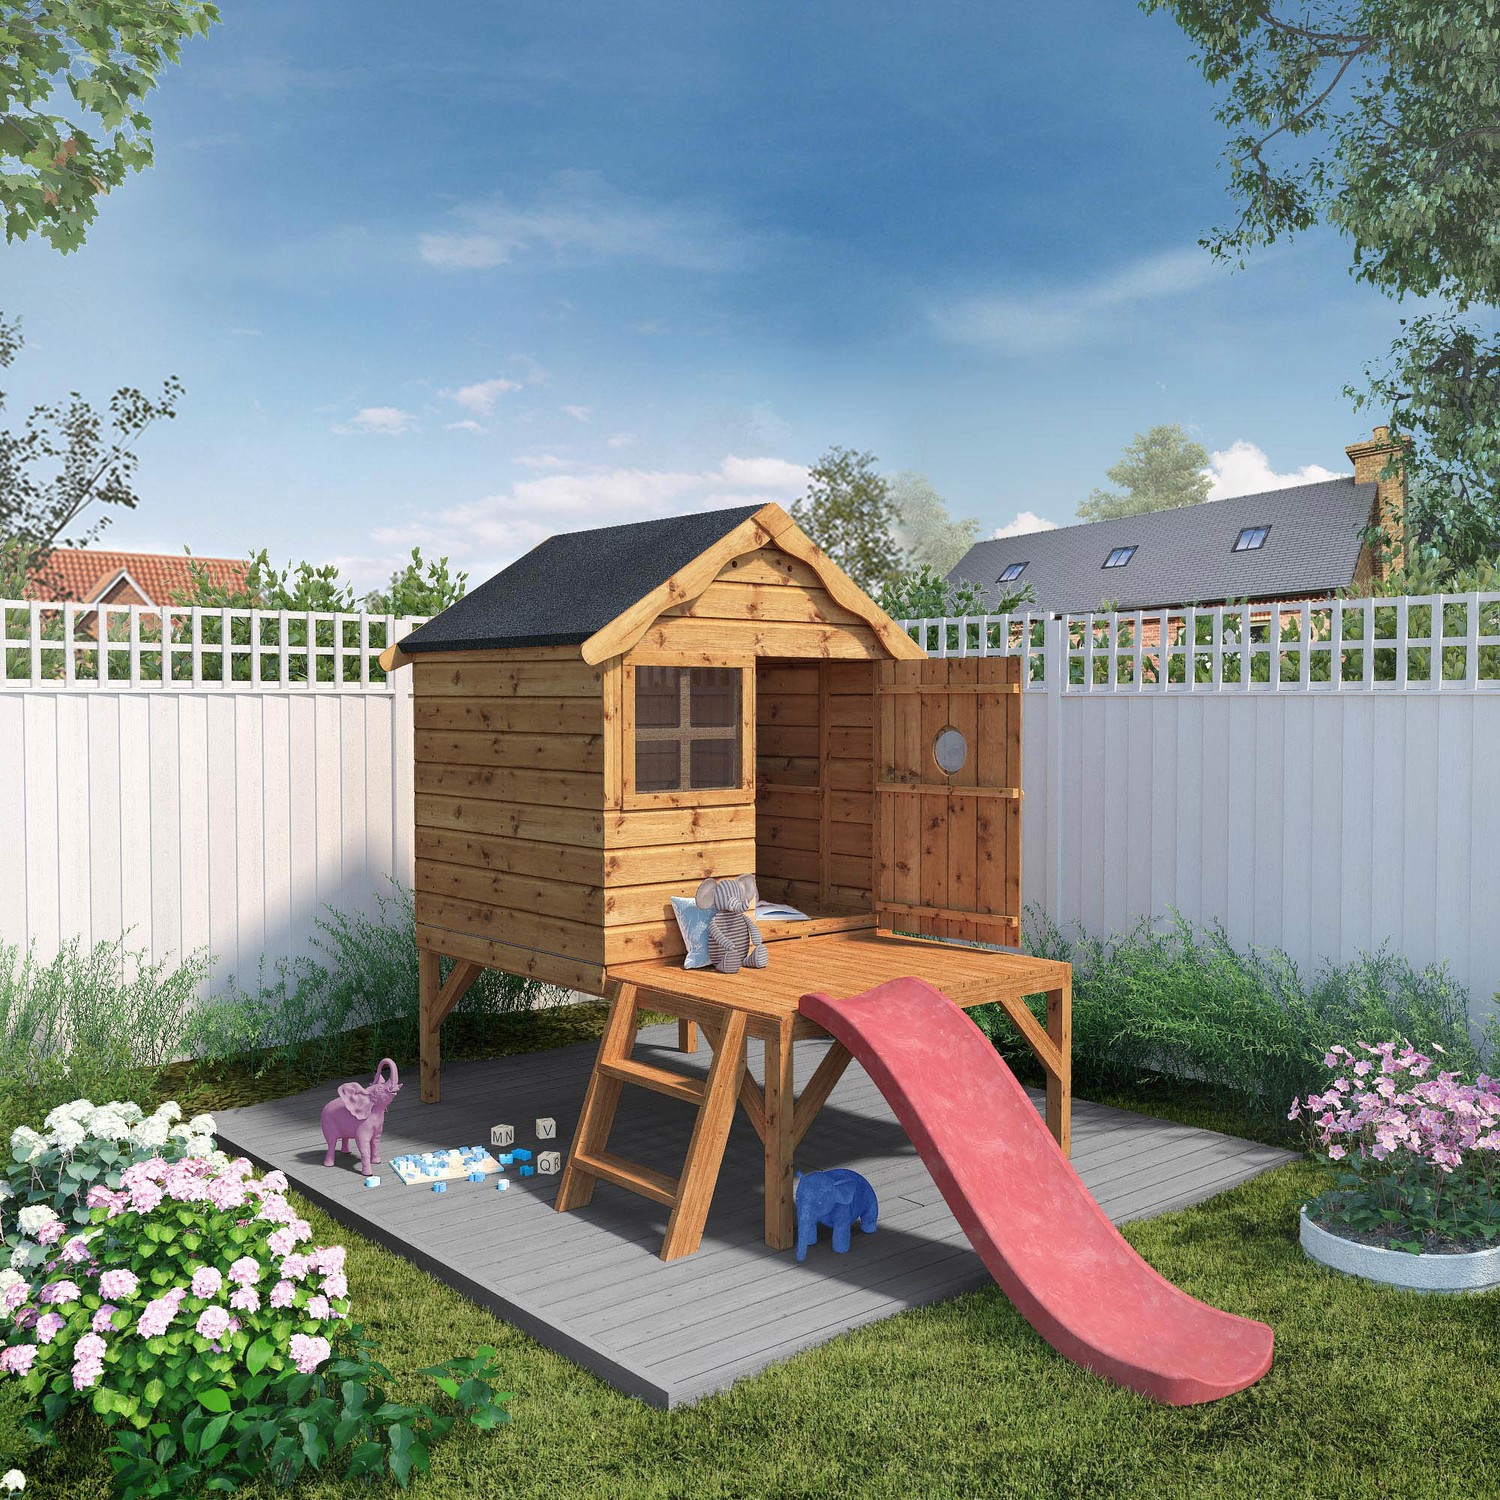 Mercia Small Wooden Tower Playhouse, Small Wooden Playhouse With Slide